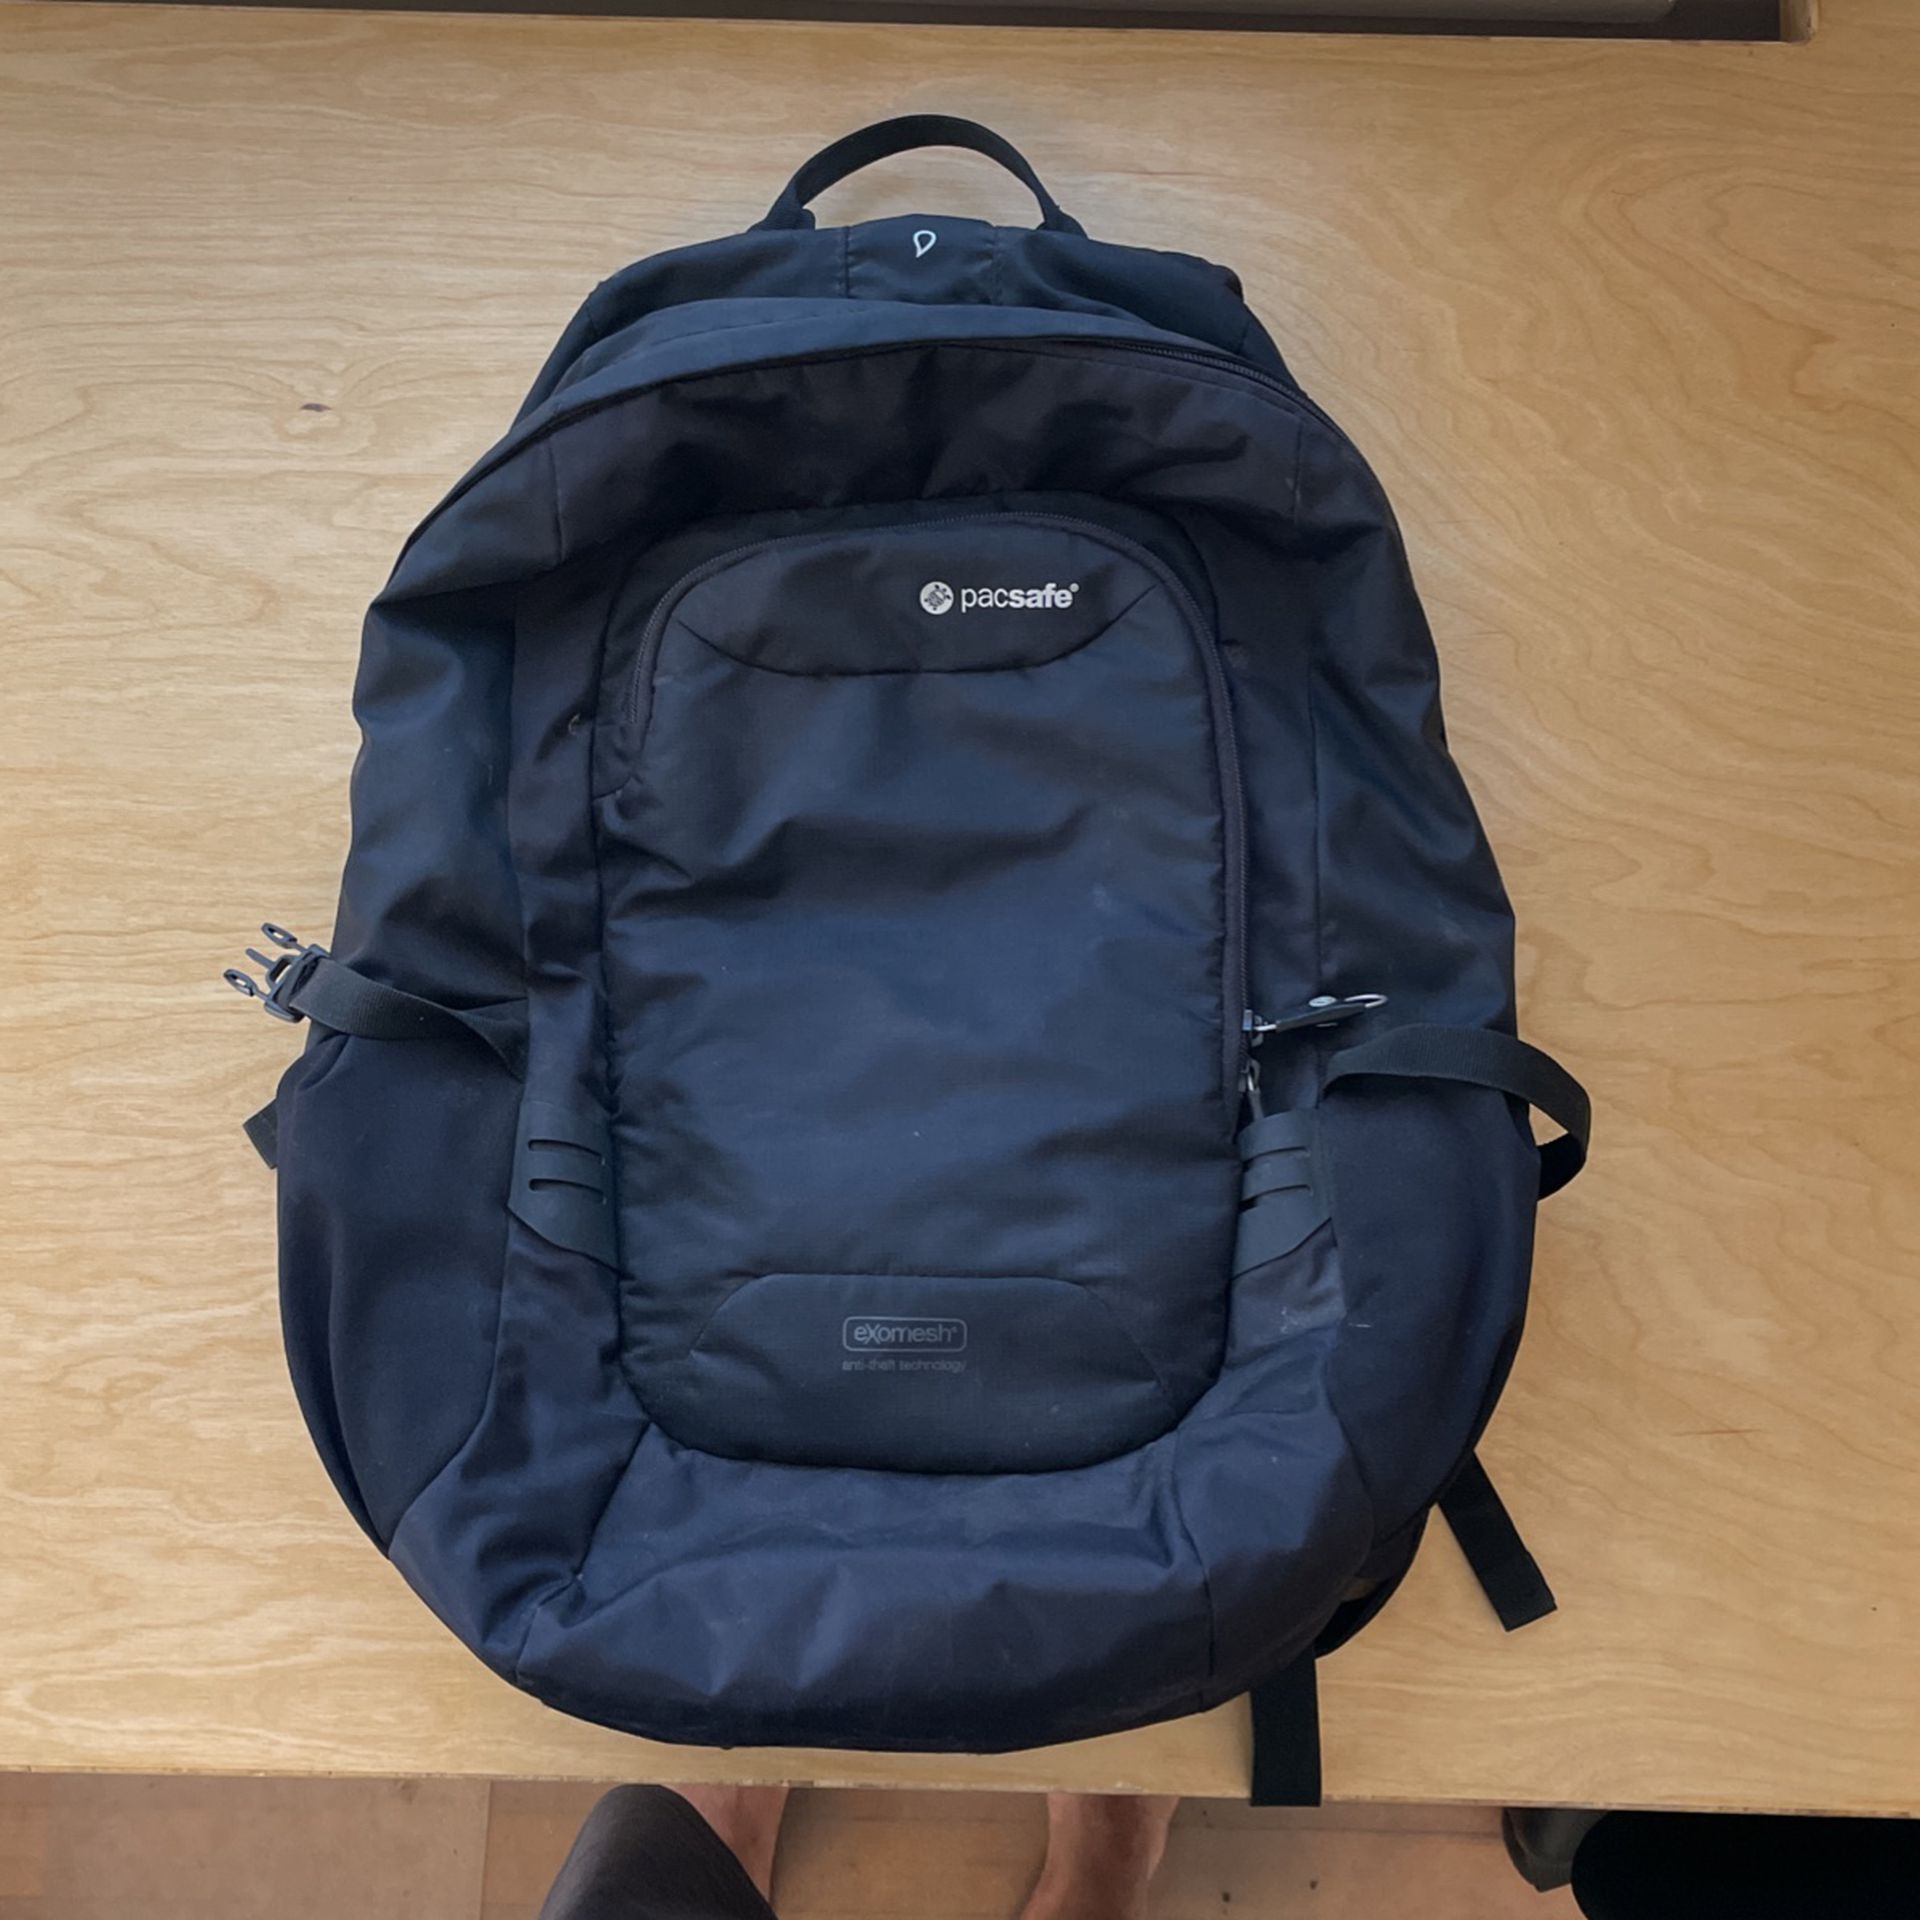 Pacsafe Backpack - Professional Grade Travel